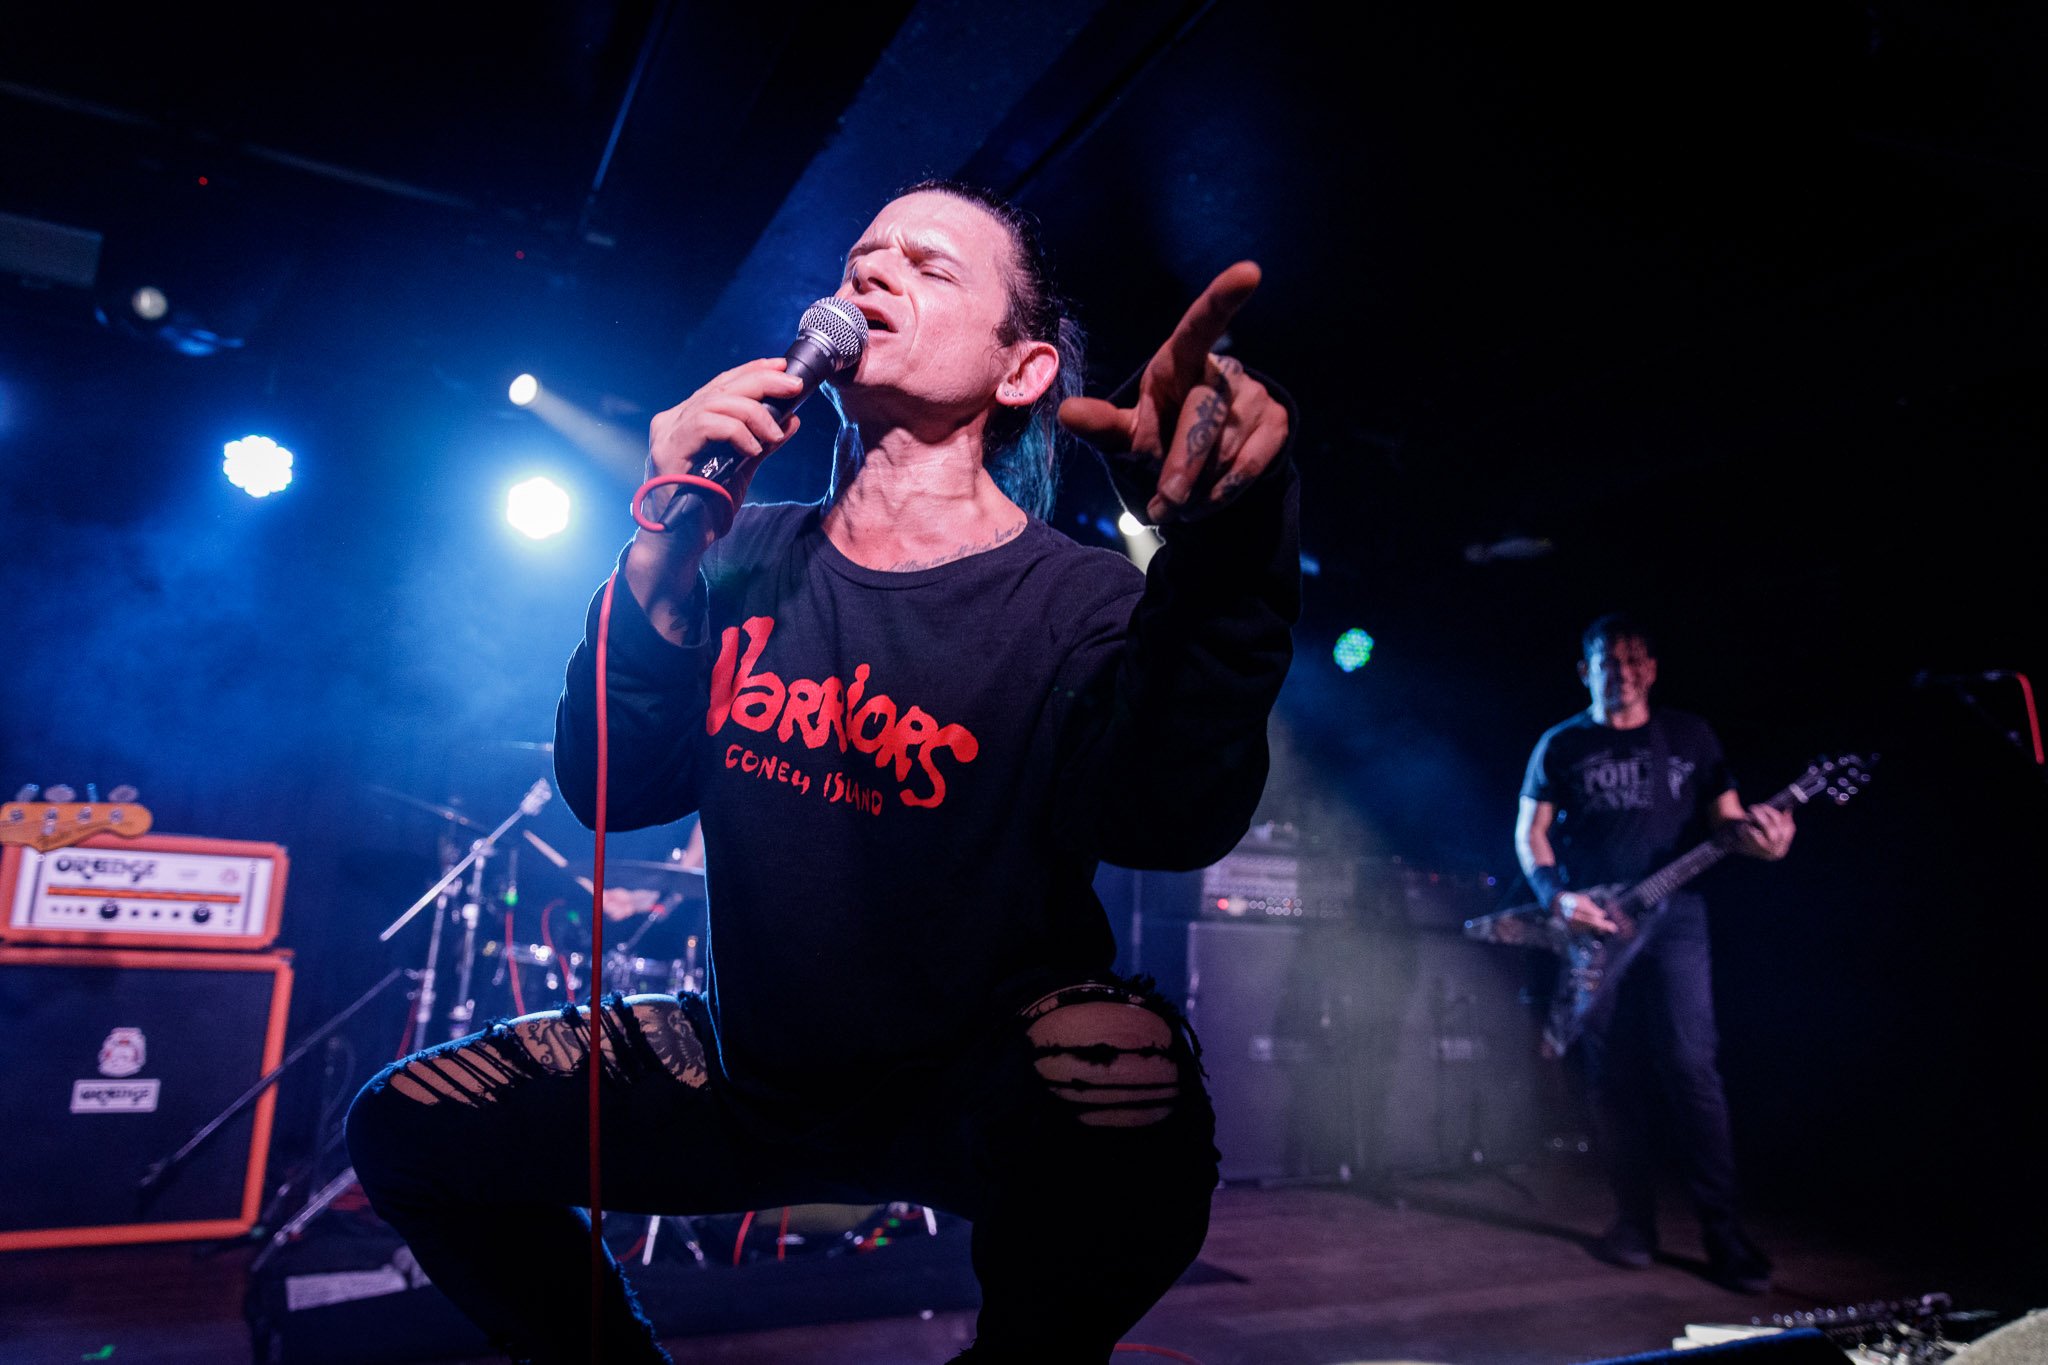 Life Of Agony at the Academy Club in Manchester on February 7th 